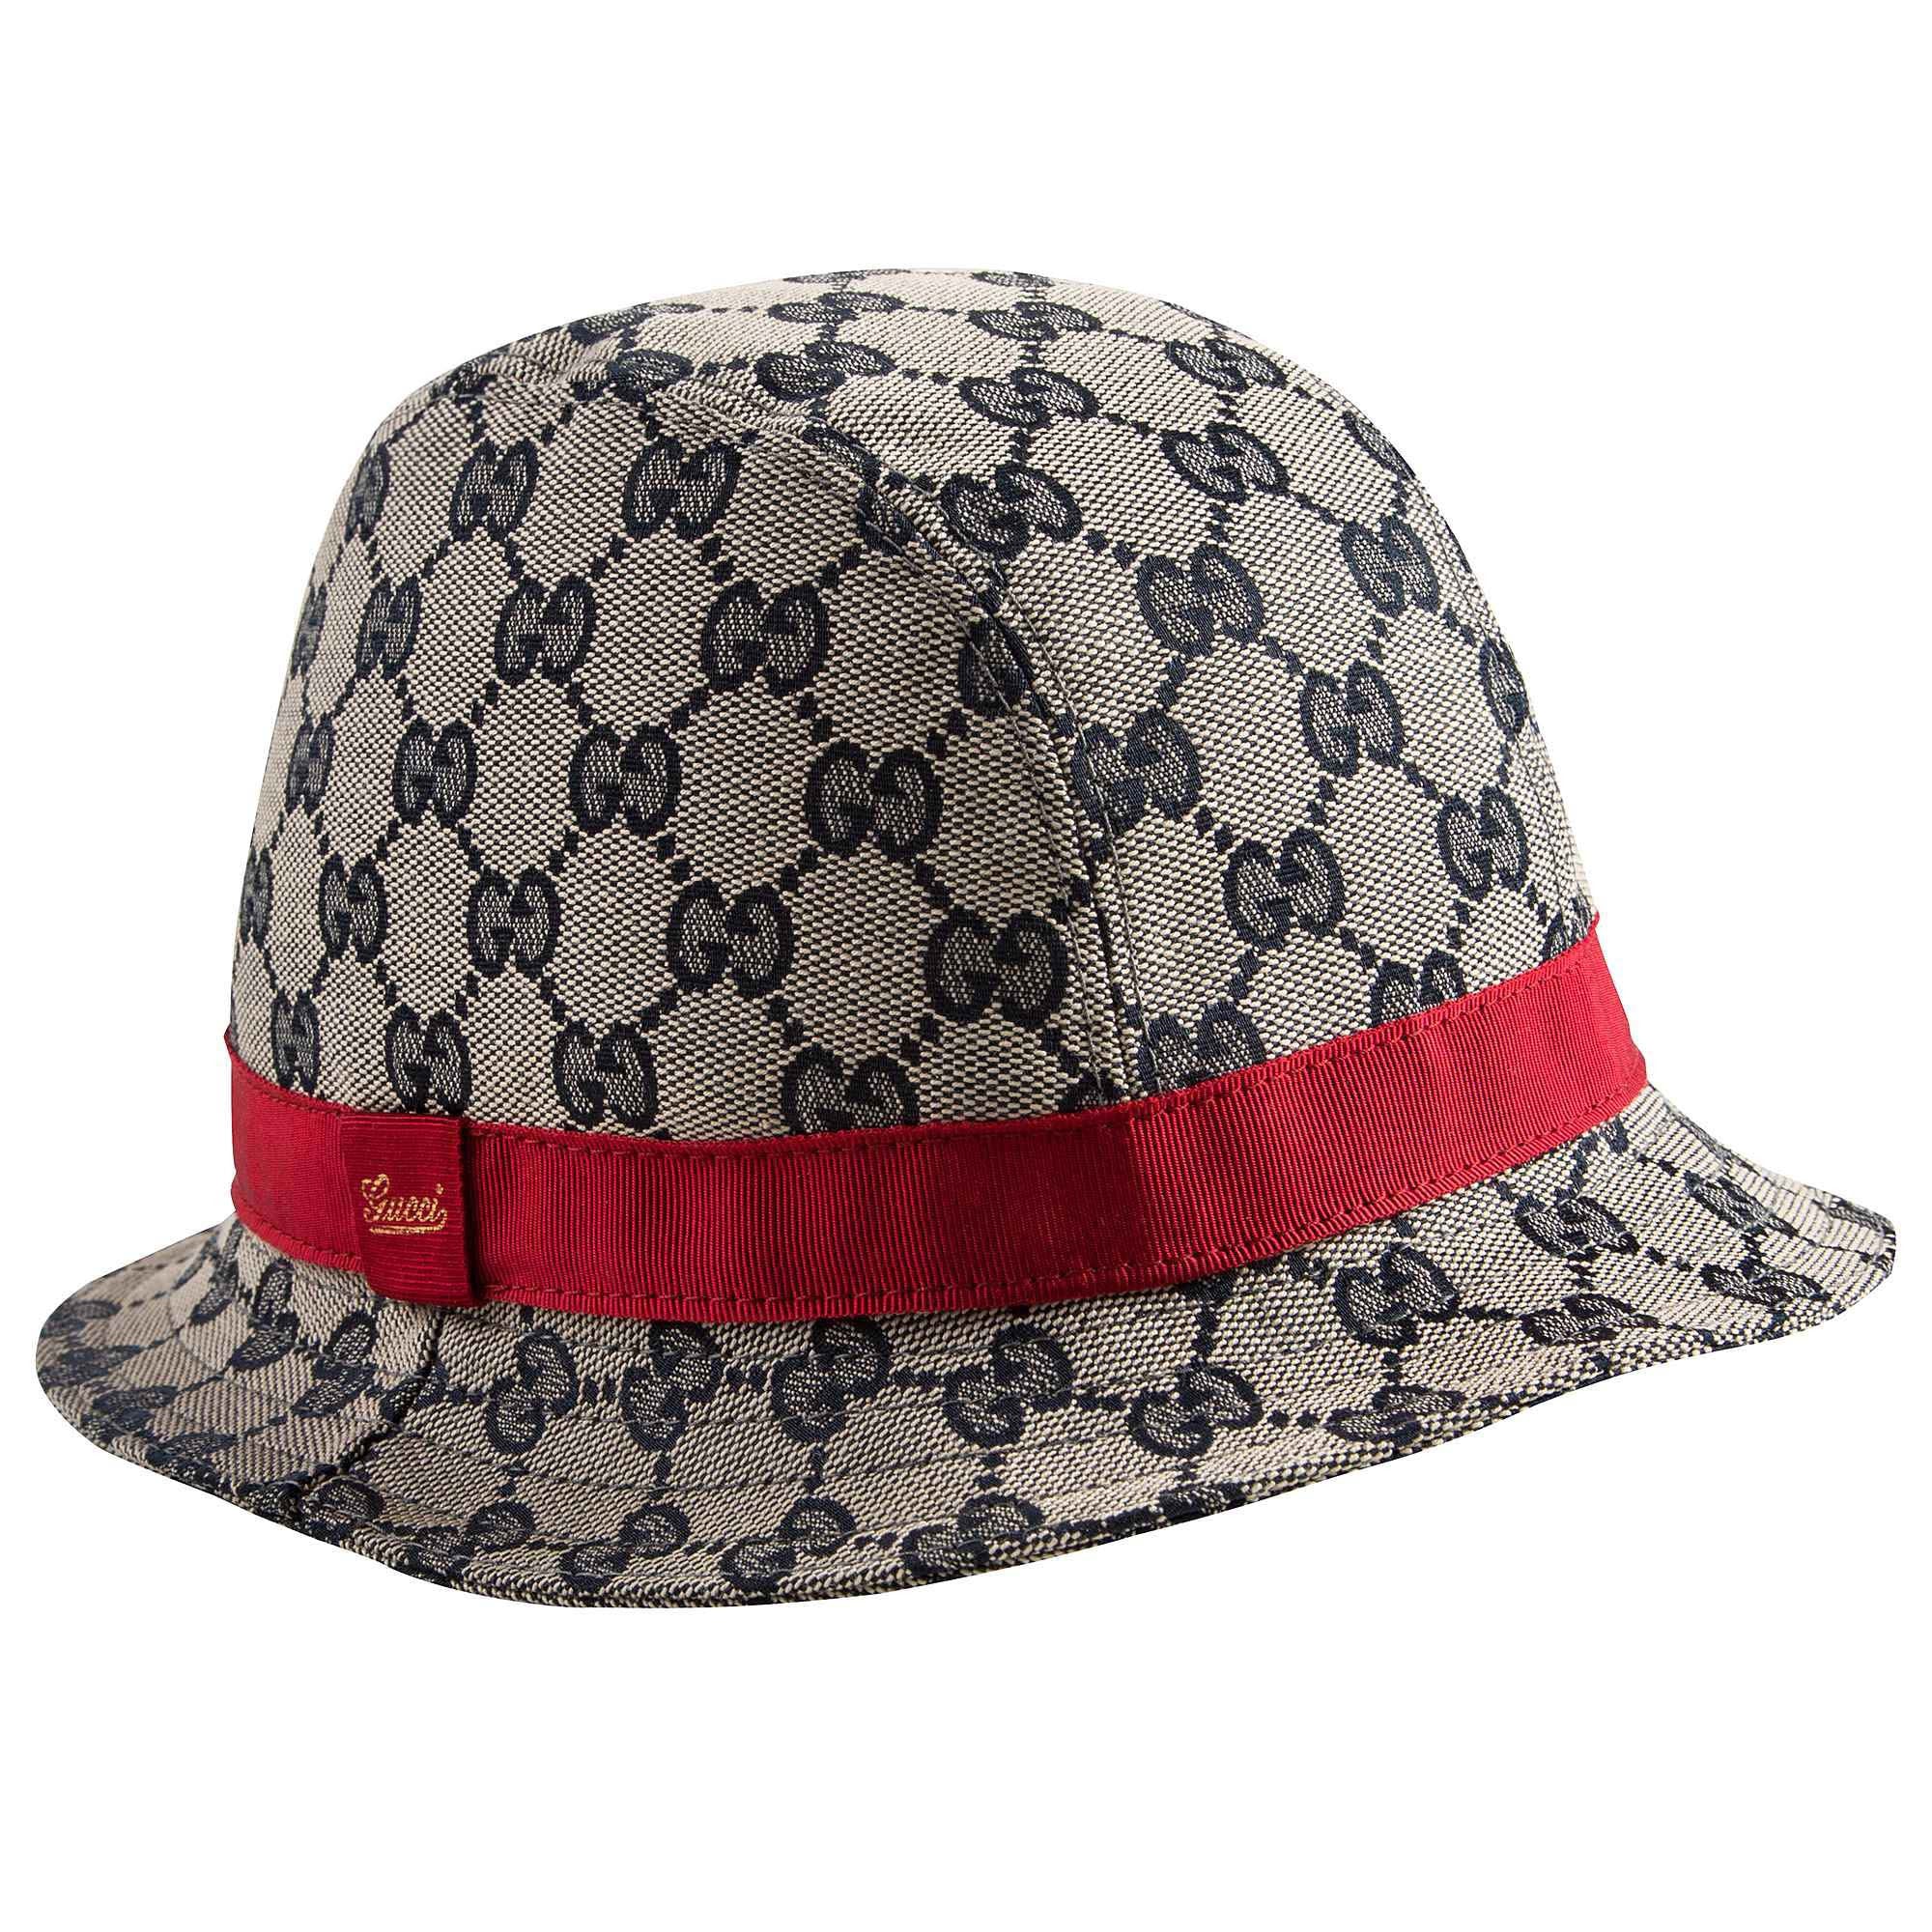 Girls Light Brown Sun Hat With Red Trims